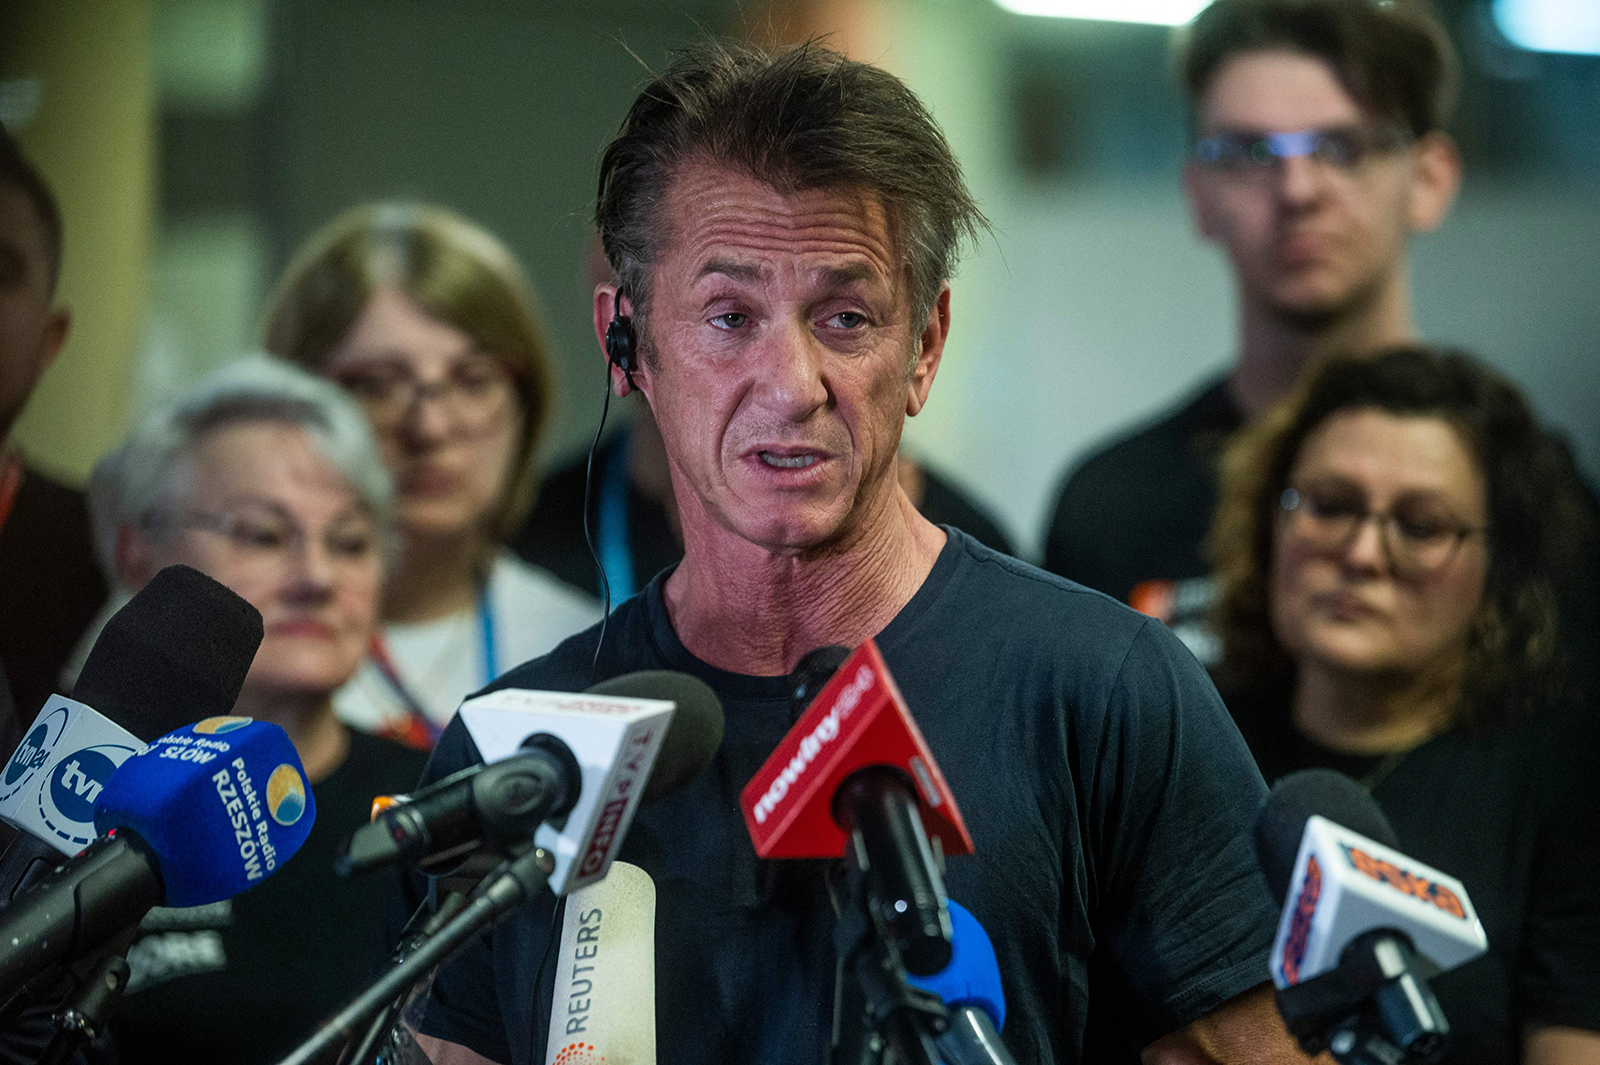  American actor Sean Penn speaks during a press conference on the agreeement of co-operation between the City of Rzeszow and the CORE foundation, on March 25, in Rzeszow, Poland.